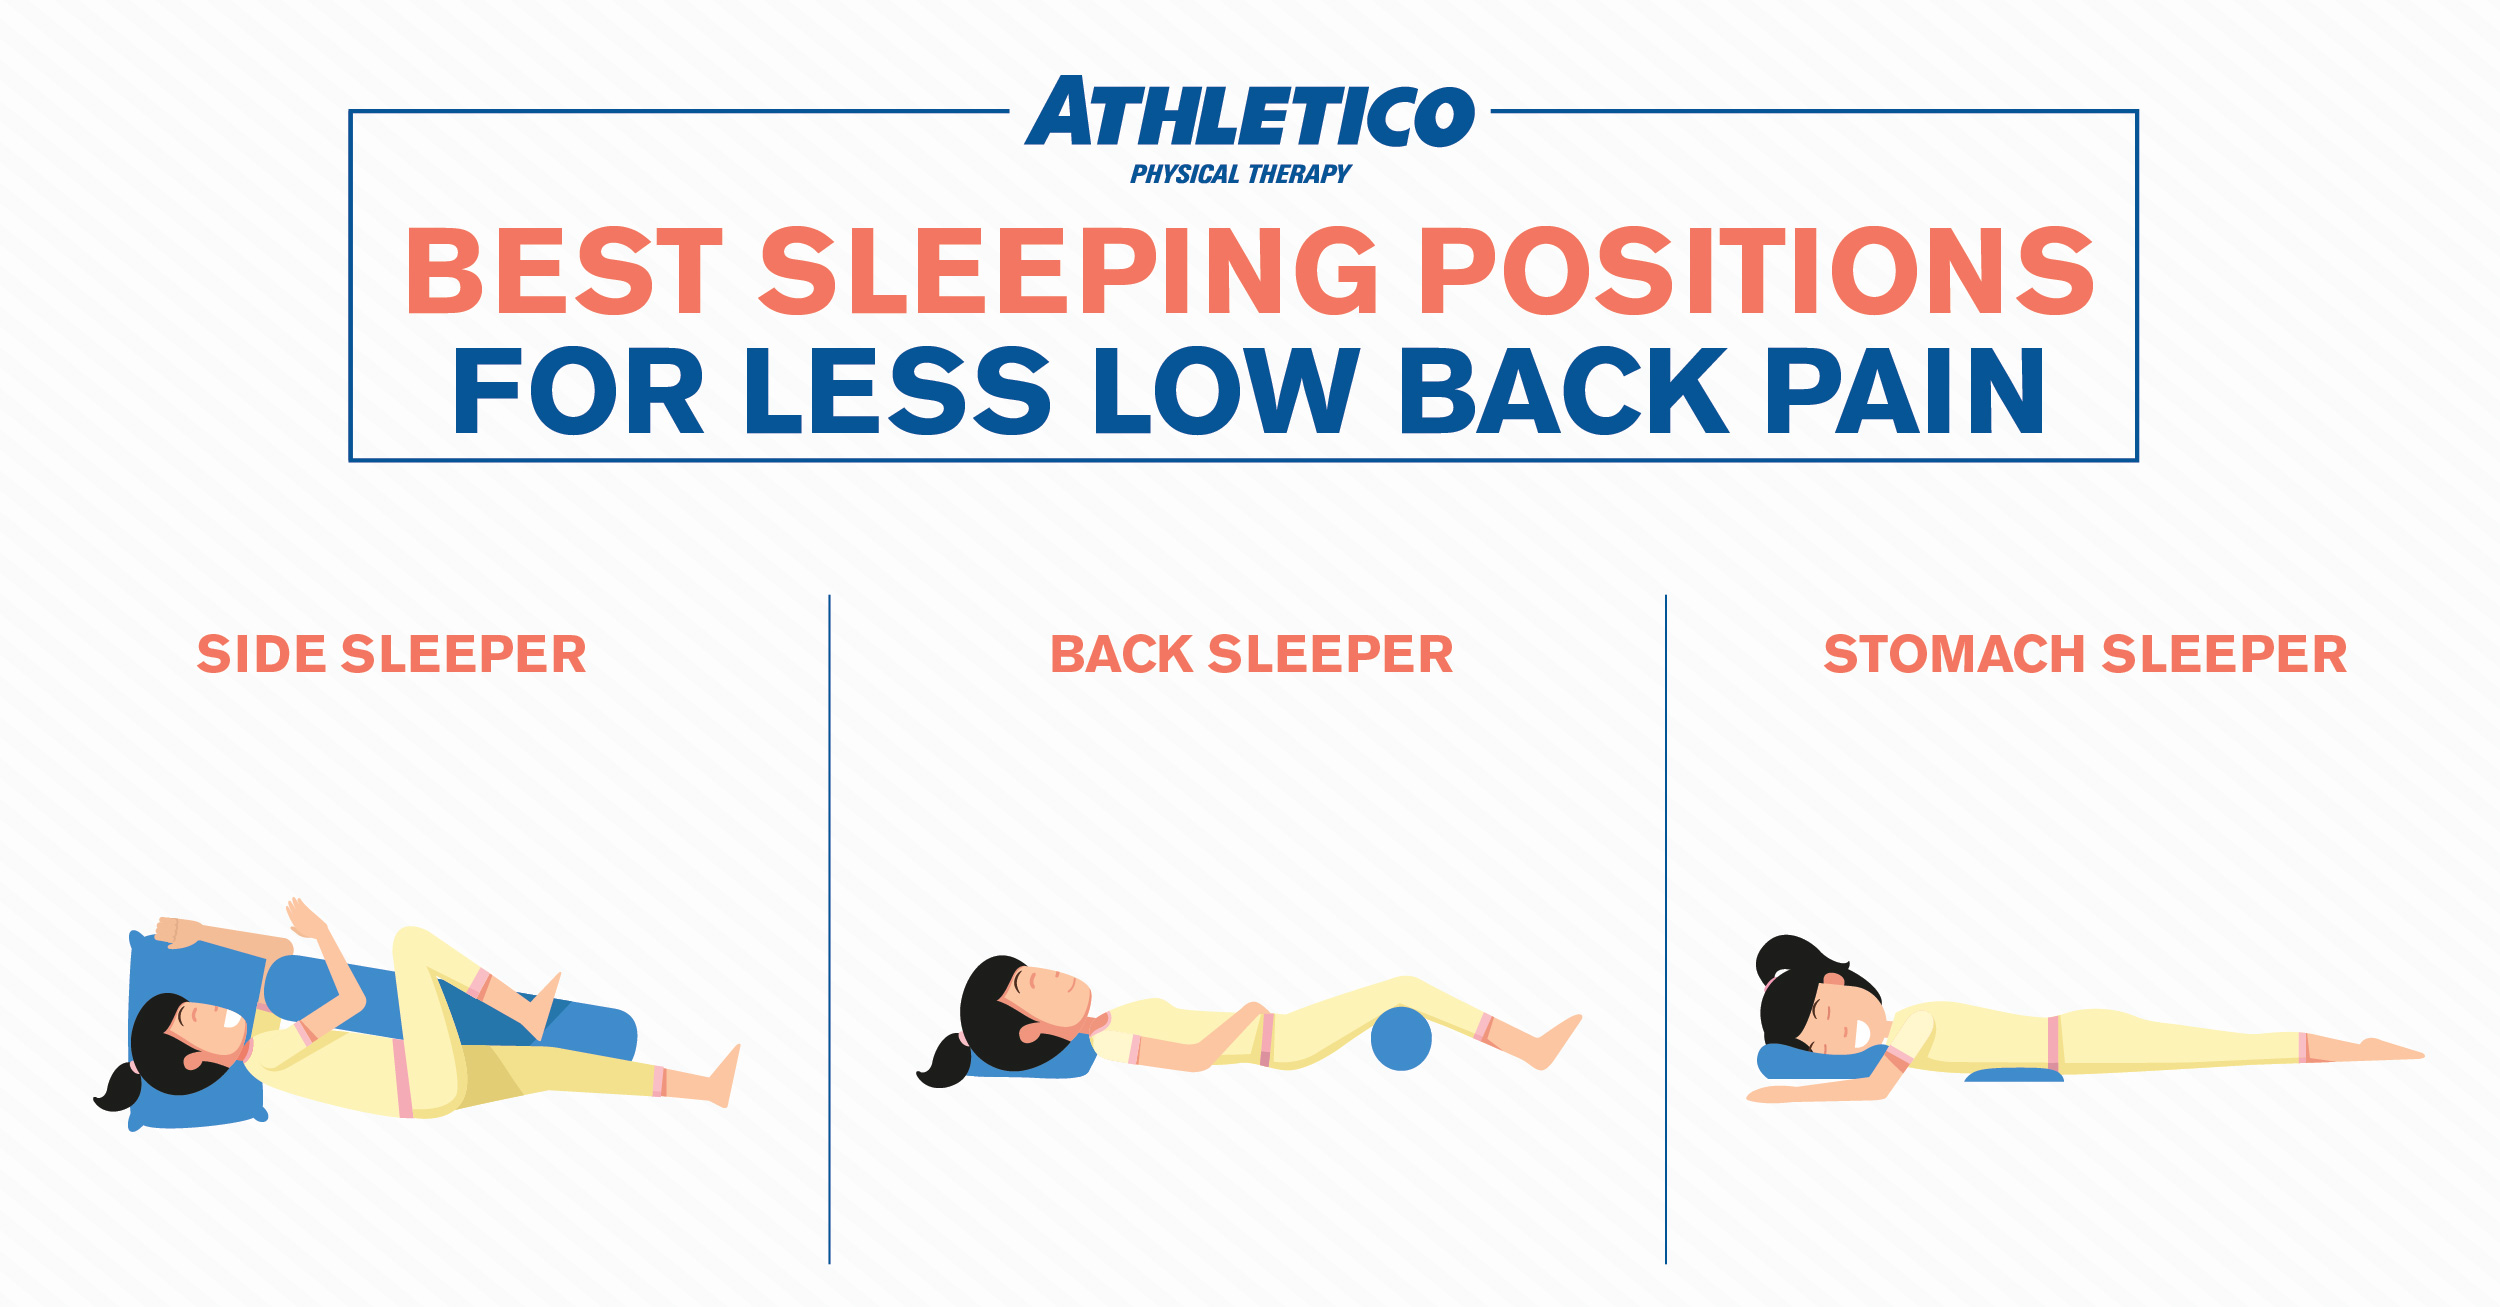 What Are The Best Sleeping Positions To Reduce Lower Back Pain? by  specialistspaintreatment - Issuu